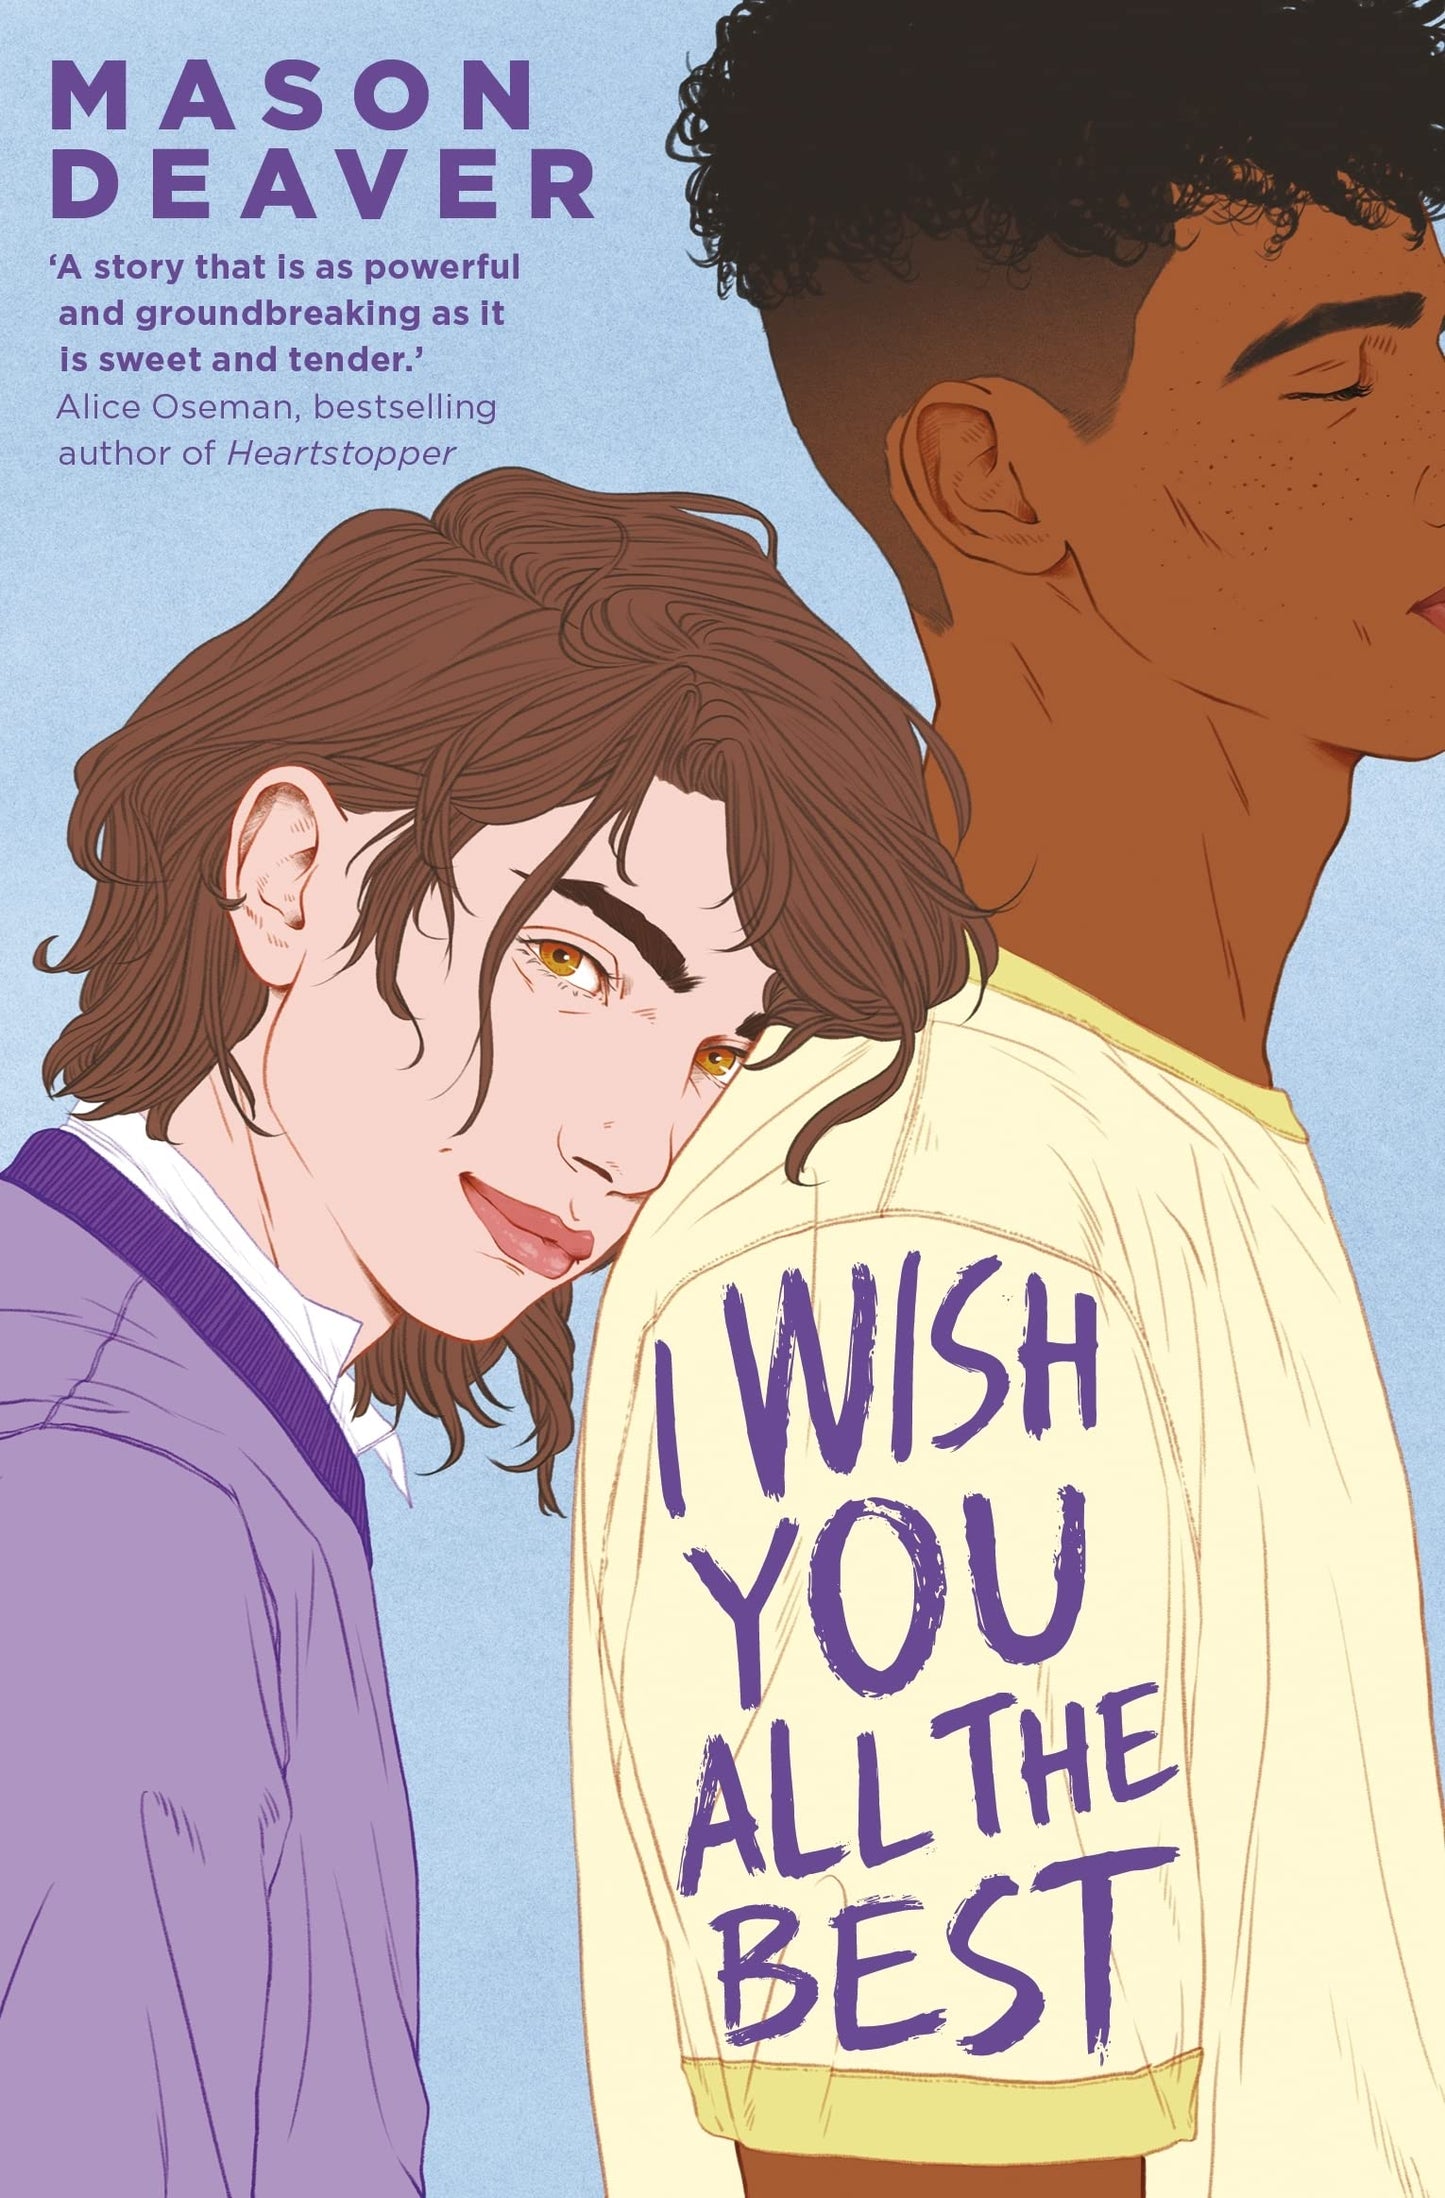 I Wish You All The Best by Mason Deaver